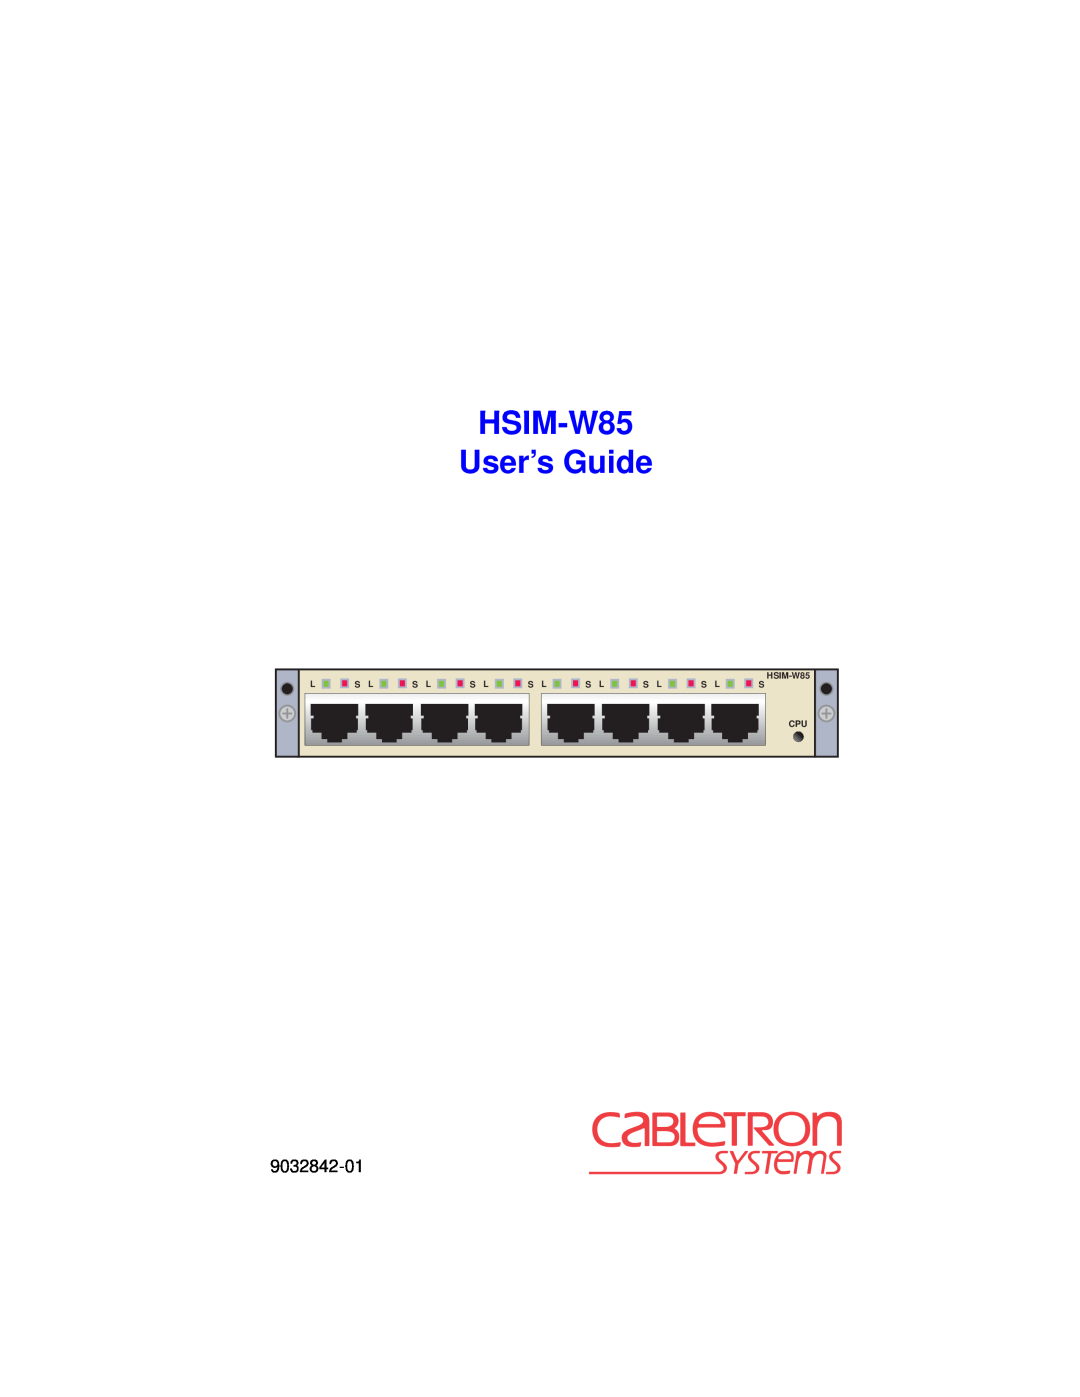 Cabletron Systems manual HSIM-W85 User’s Guide, 9032842-01 